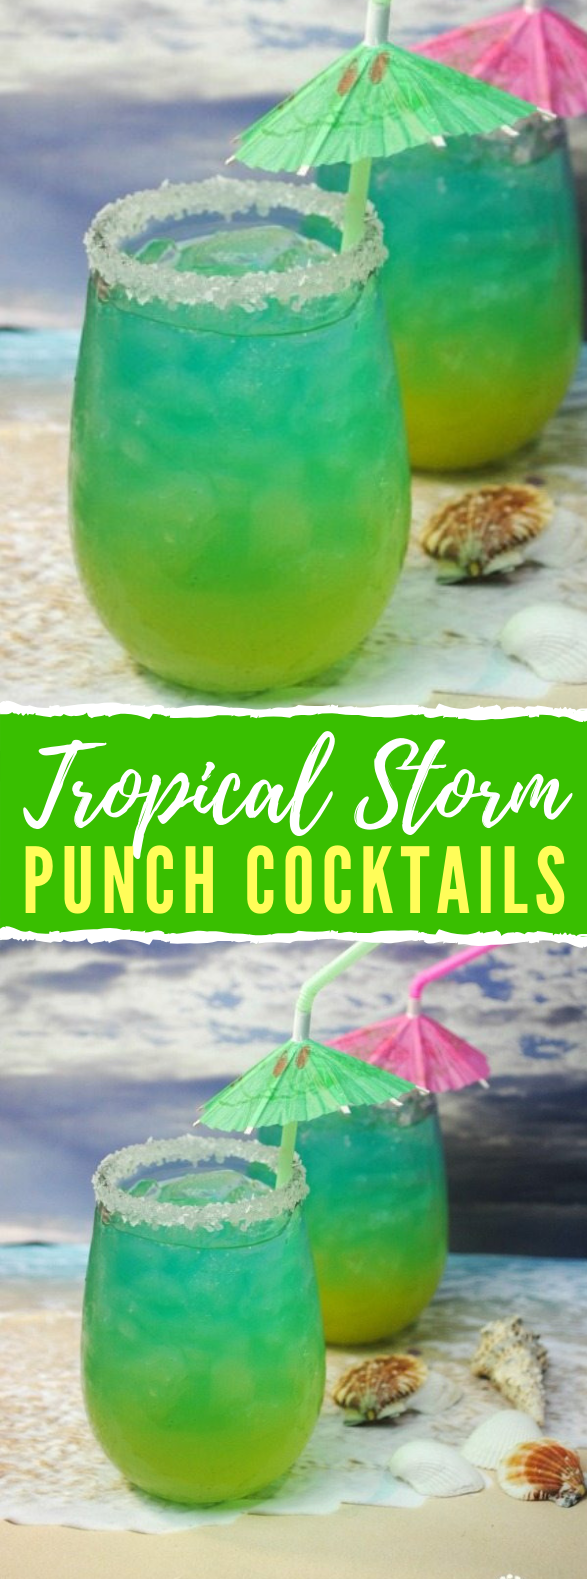 RUM COCKTAILS: TROPICAL STORM PUNCH #drinks #summertime